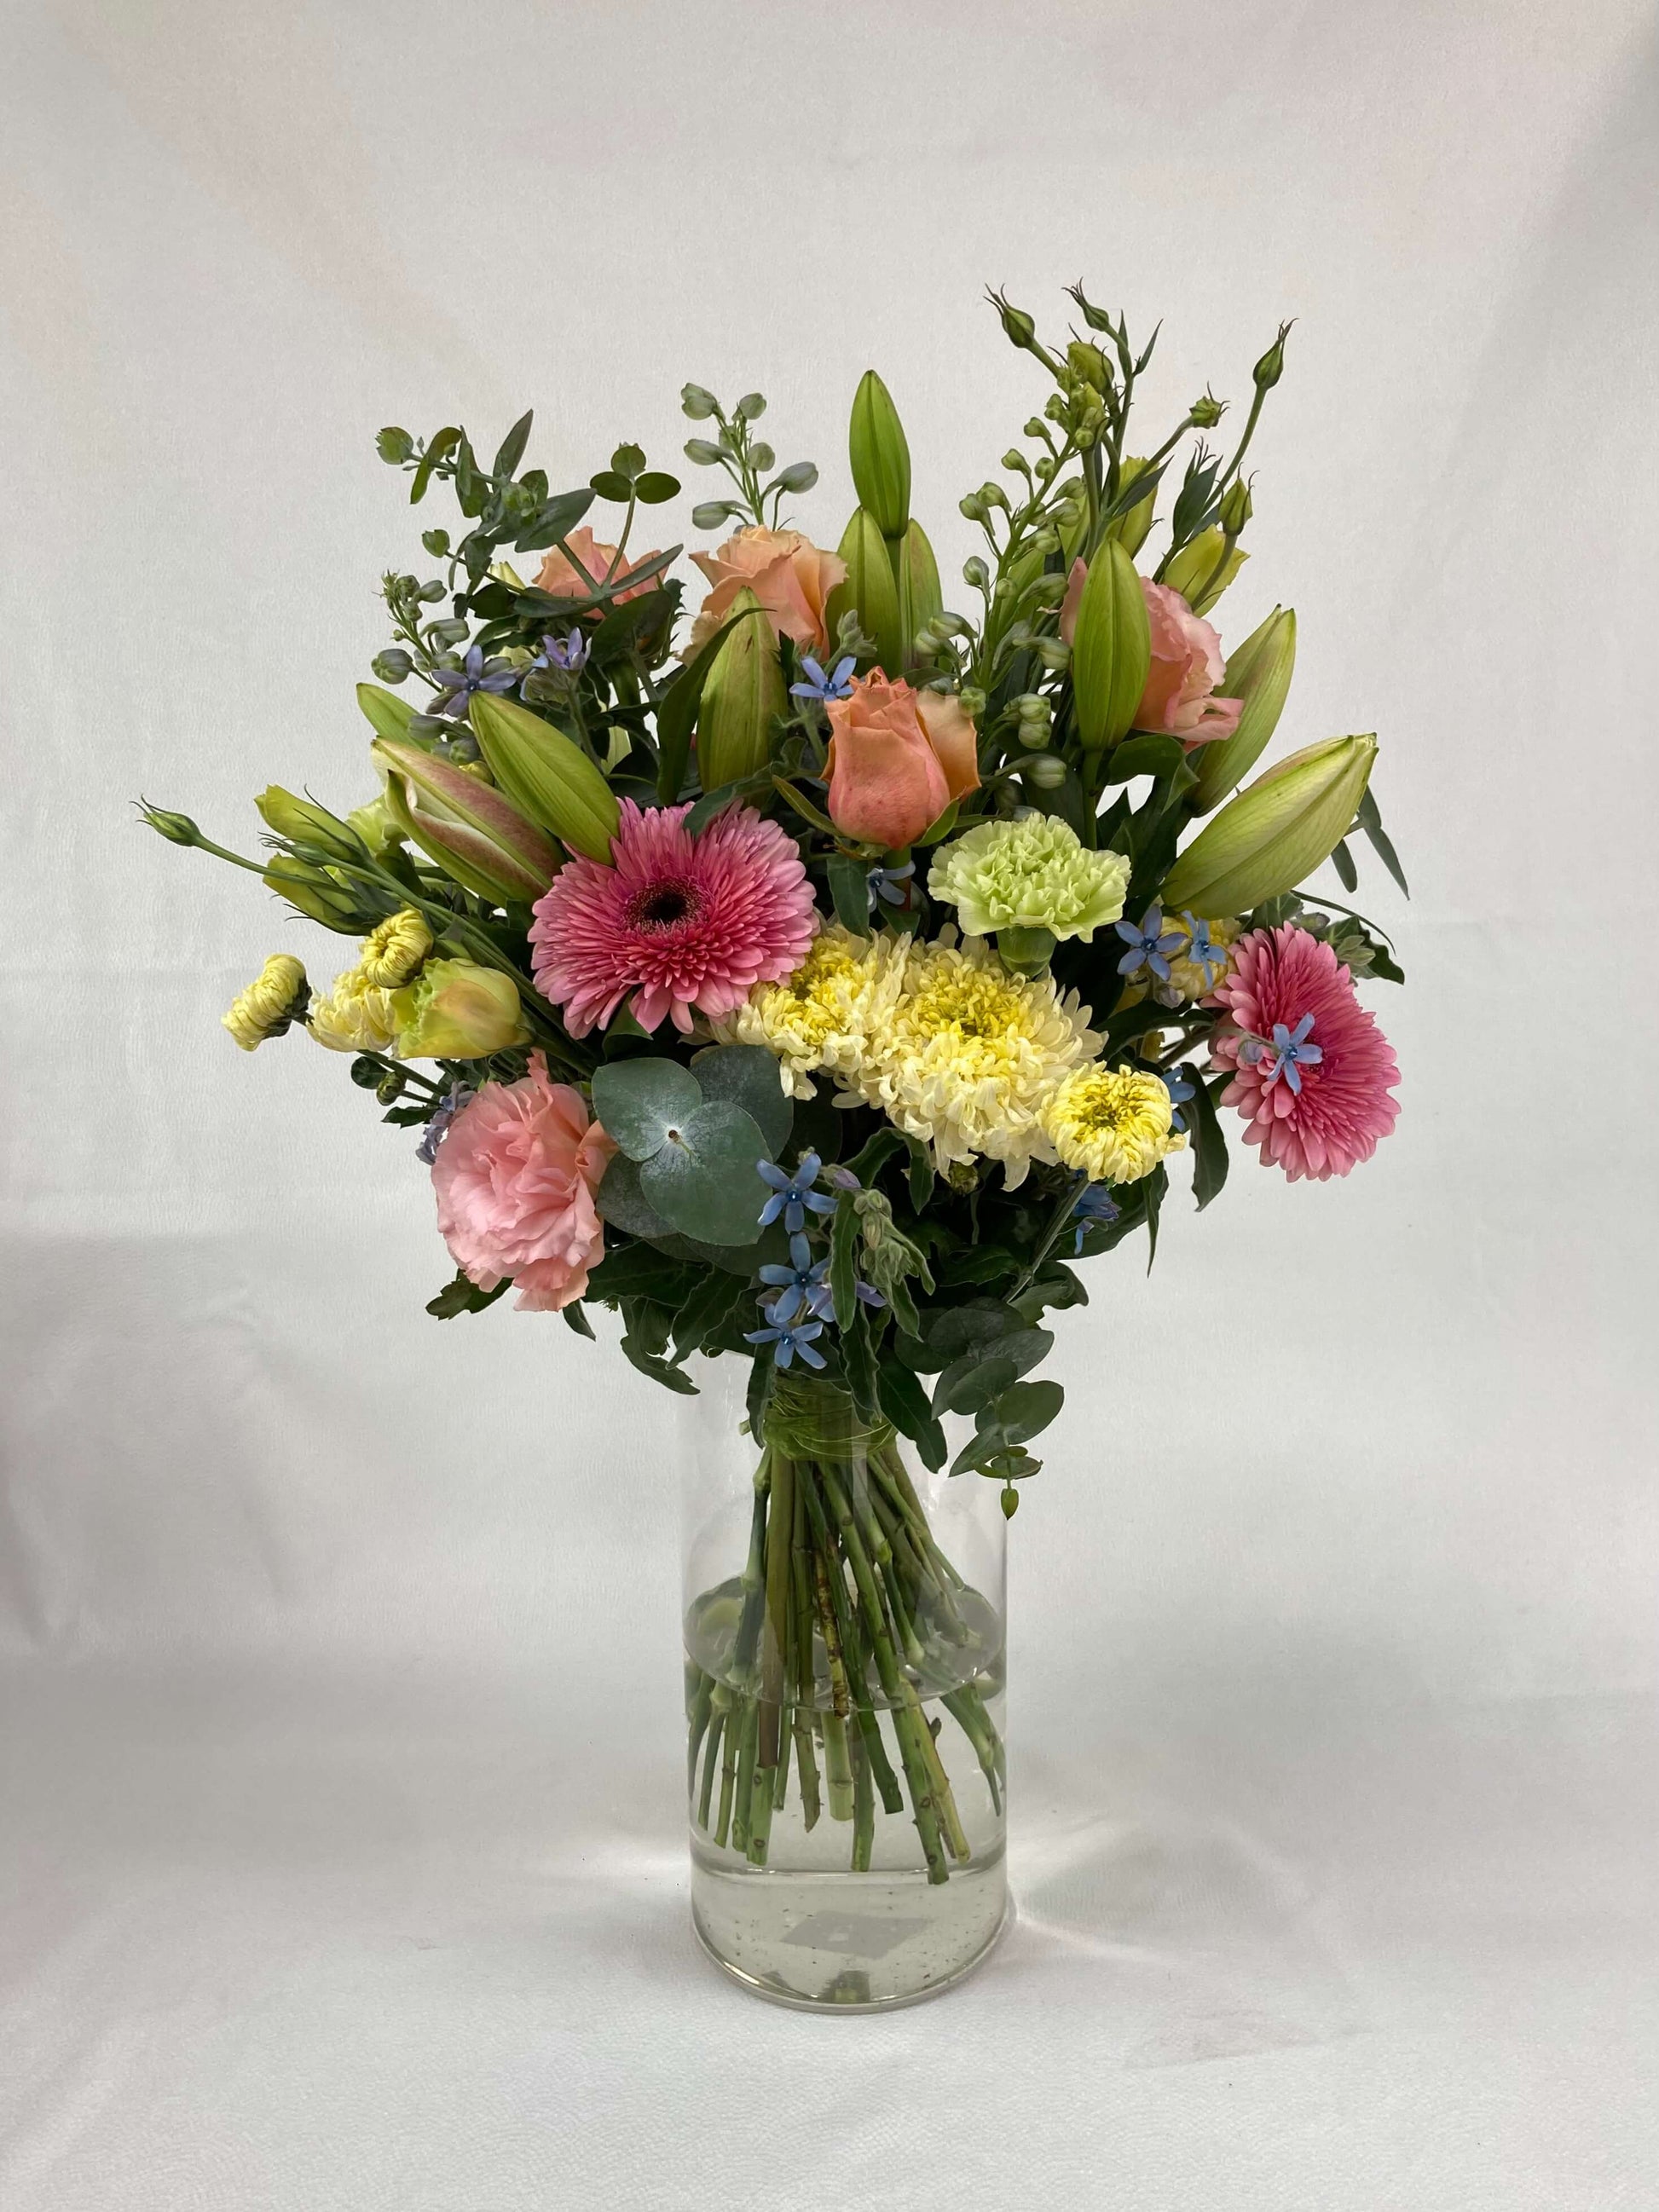 A pastel bouquet you can receive in our flower subscription.